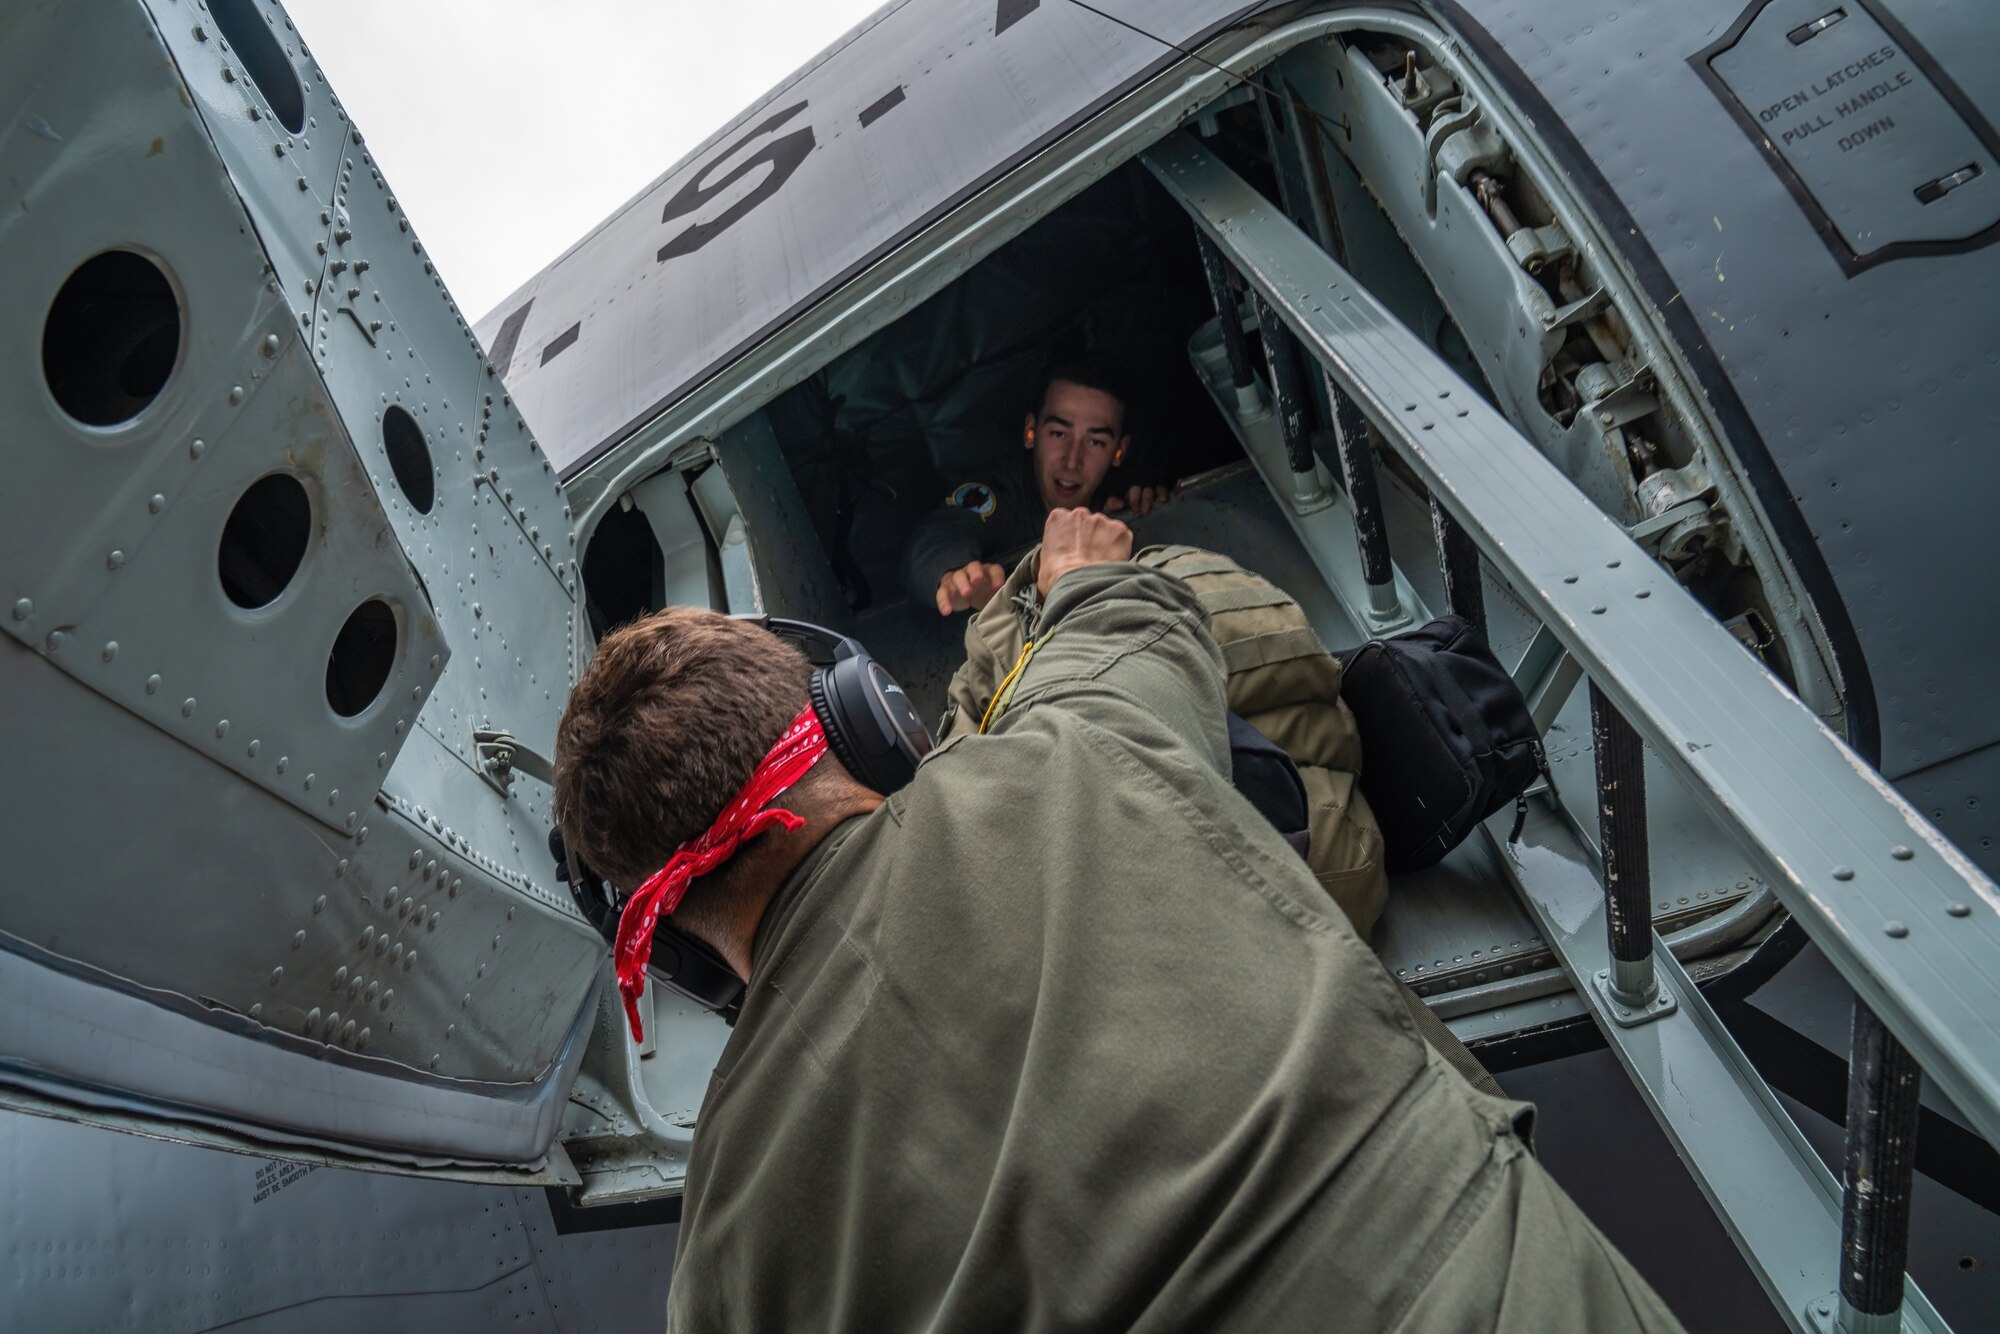 U.S. Air Force Staff Sgt. Dalton Degeneffe, 50th Air Refueling Squadron boom operator, hands luggage to Capt. Andrew Bragado, 50th ARS pilot, prior to a flight during the 6th Air Refueling Wing’s Agile Combat Employment capstone exercise at Joint Base Charleston, South Carolina, Aug. 23, 2022.